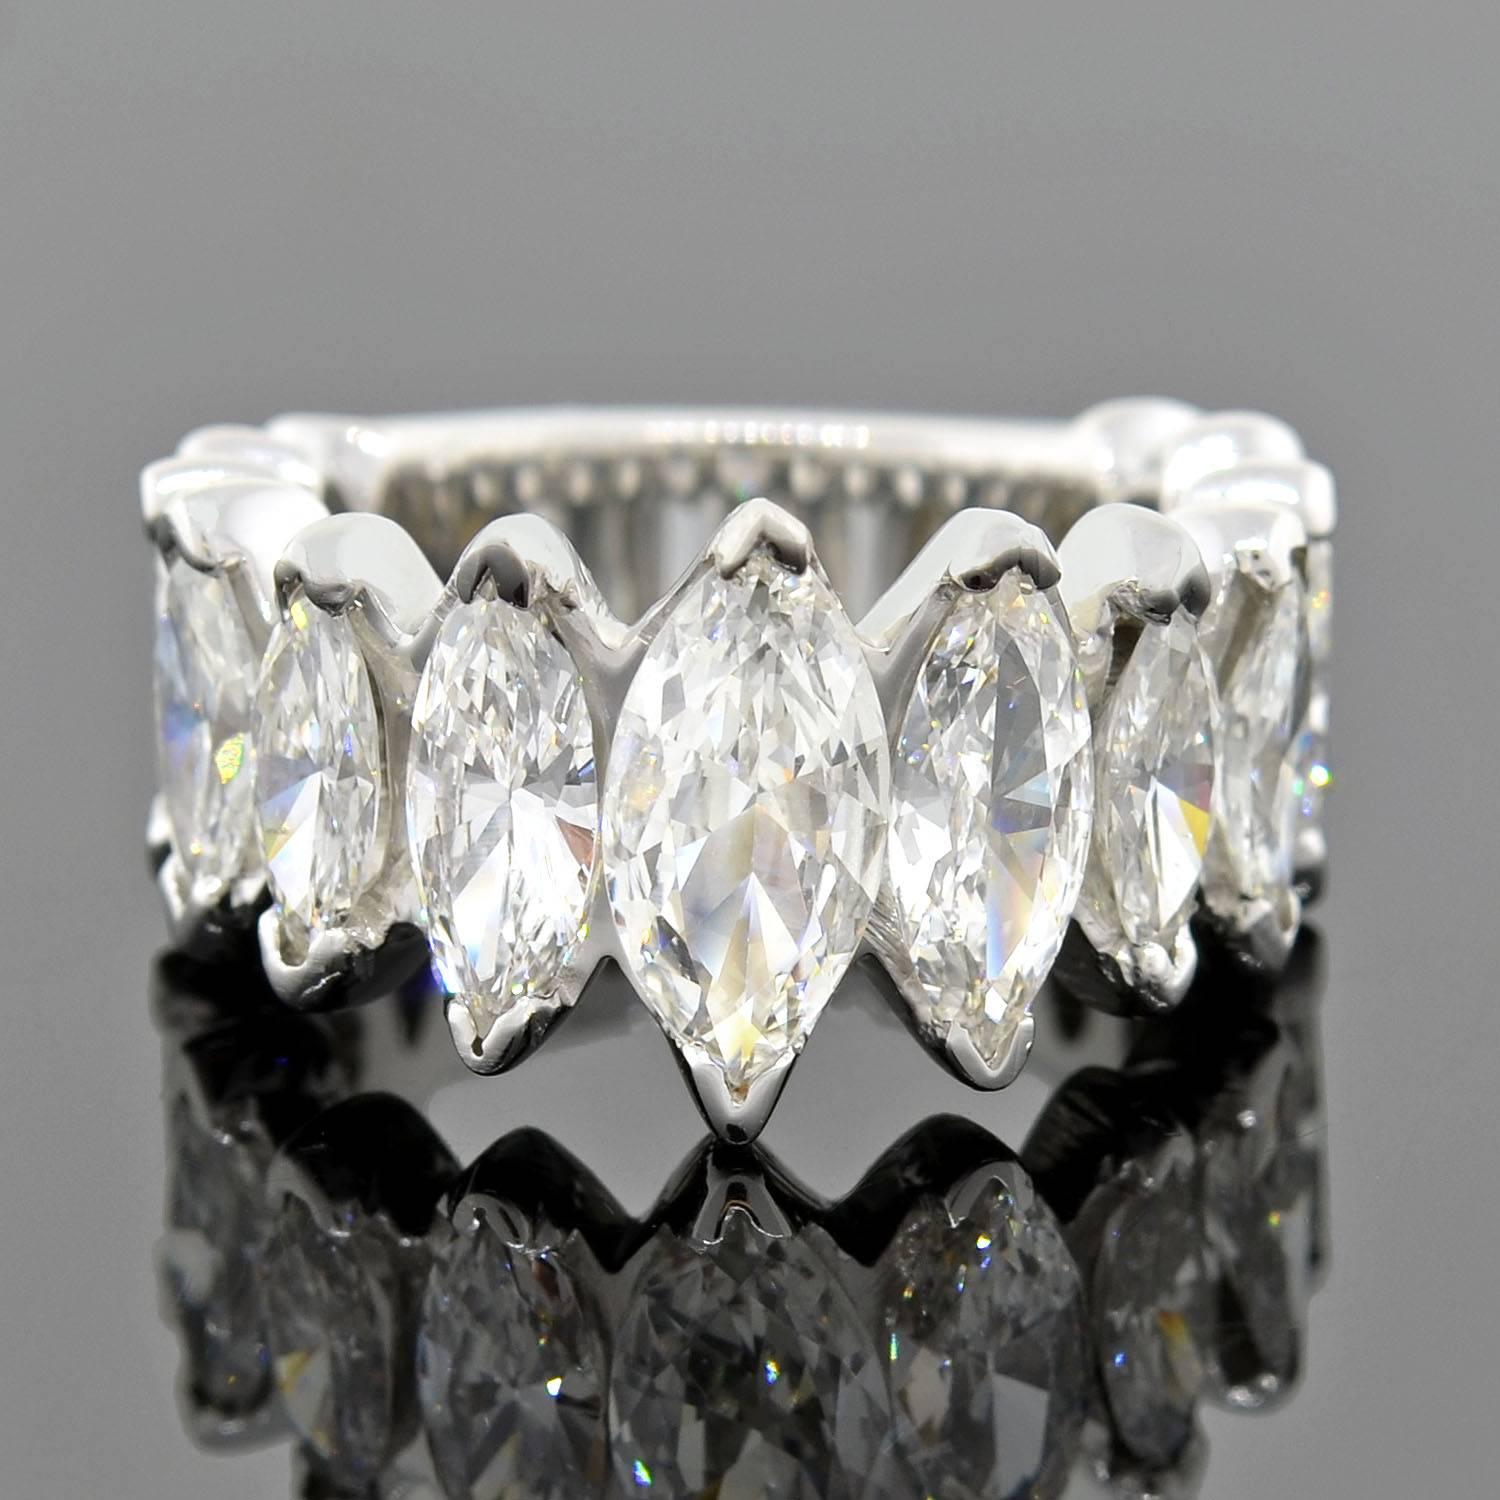 An incredible vintage diamond ring from the 1960s! This beautiful piece is made of platinum and has a dazzling design encrusted with 6.44ctw of sparkling diamonds. Set across the front are 13 marquise cut diamonds which rest in a beautiful,